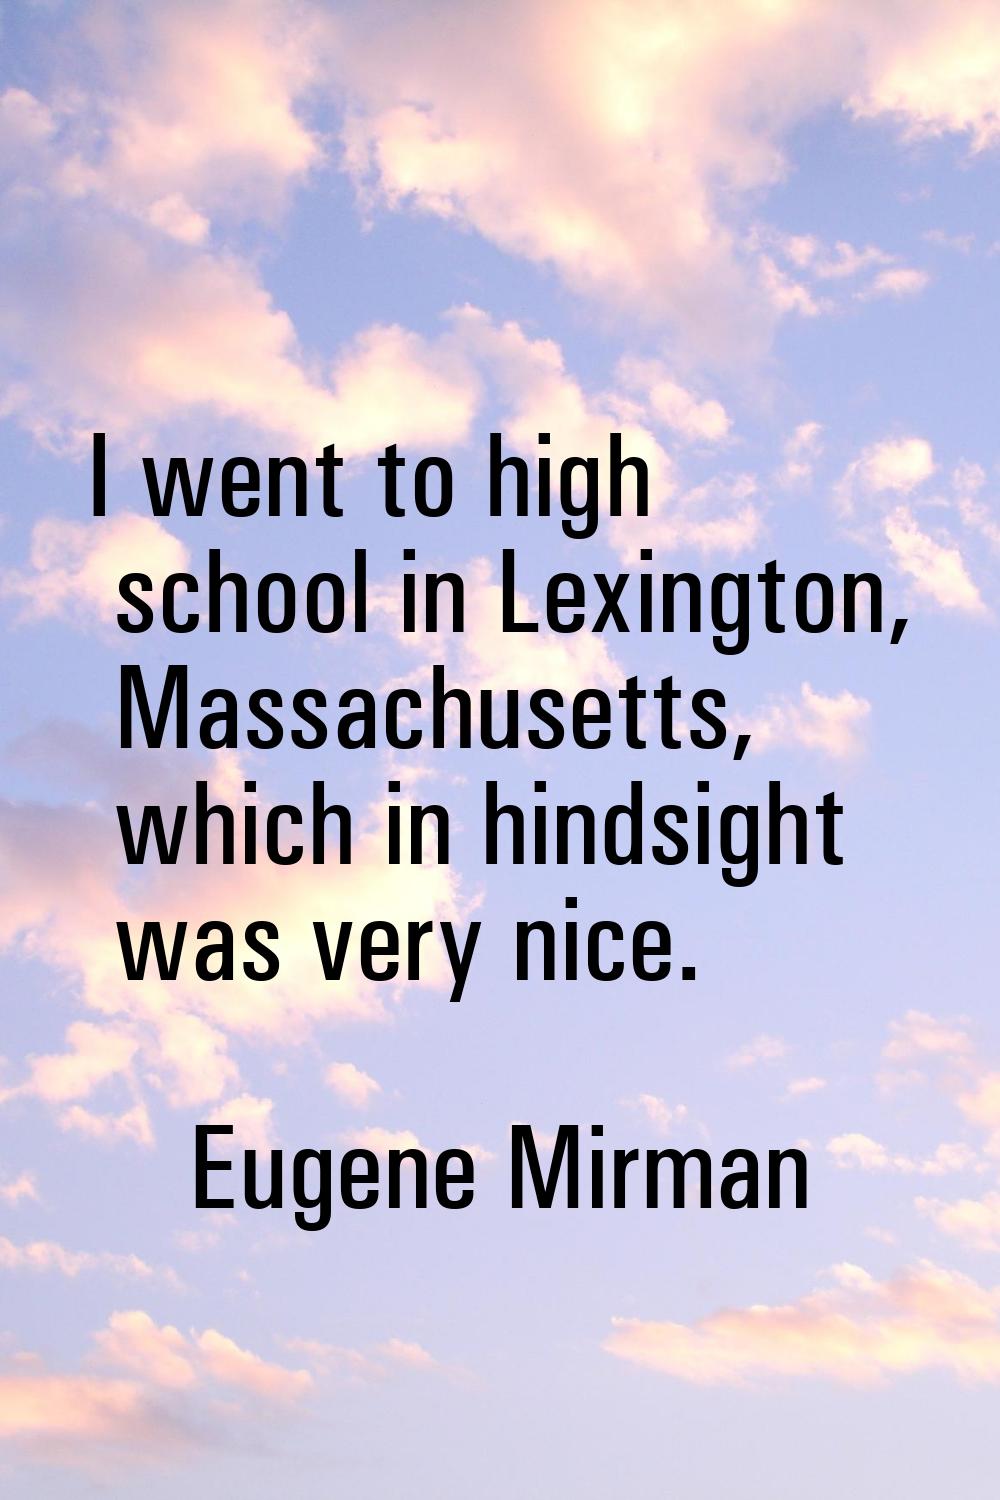 I went to high school in Lexington, Massachusetts, which in hindsight was very nice.